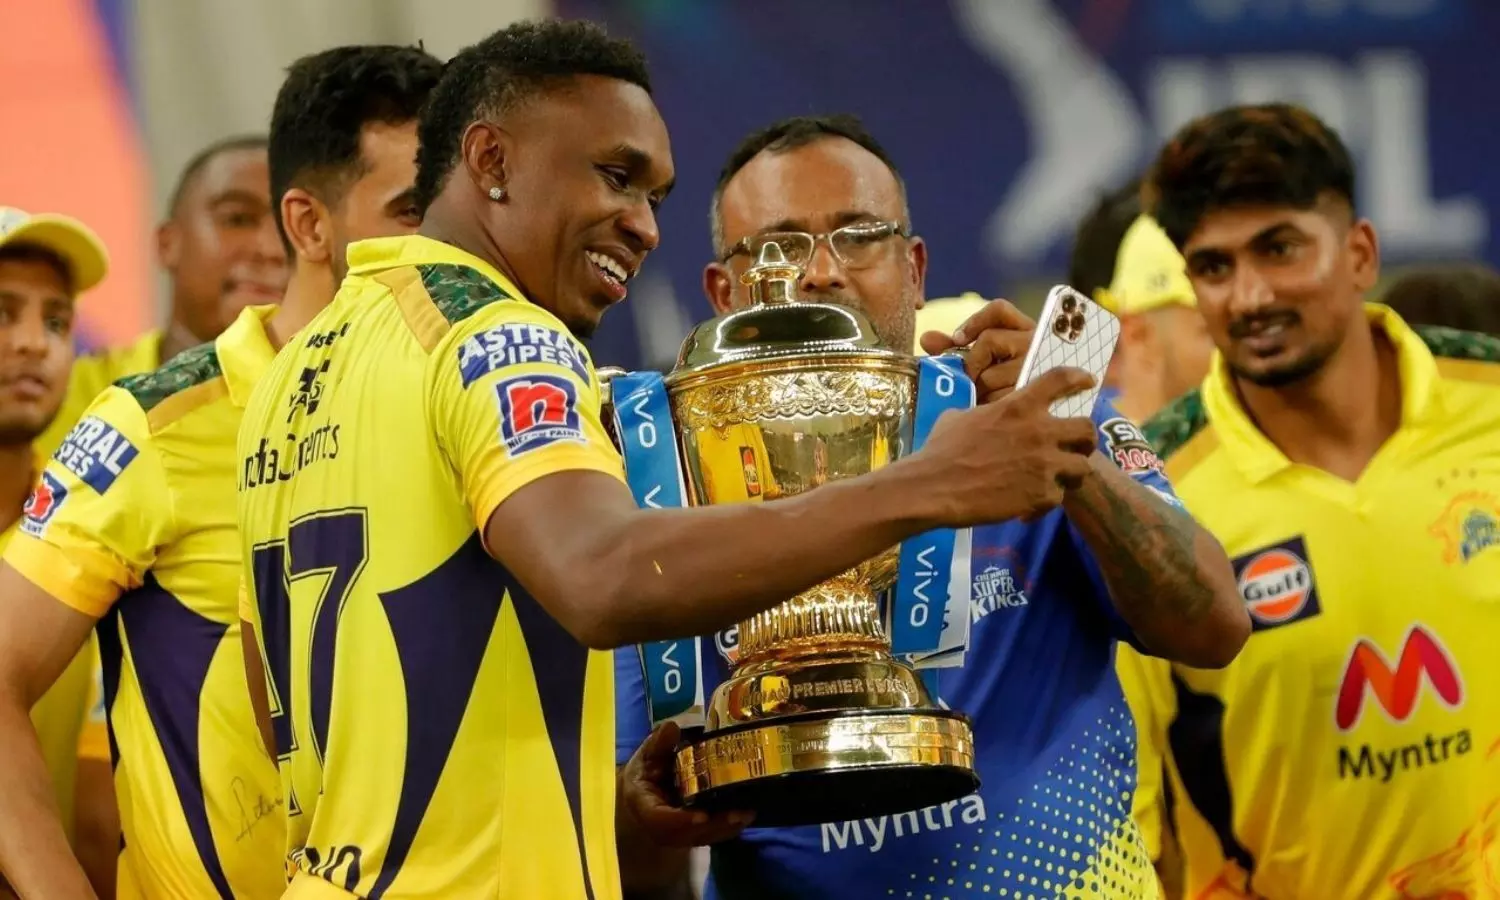 IPL 2021 Final: CSK vs KKR - Dwayne Bravo and Moeen Ali open about their  experiences with Chennai Super Kings